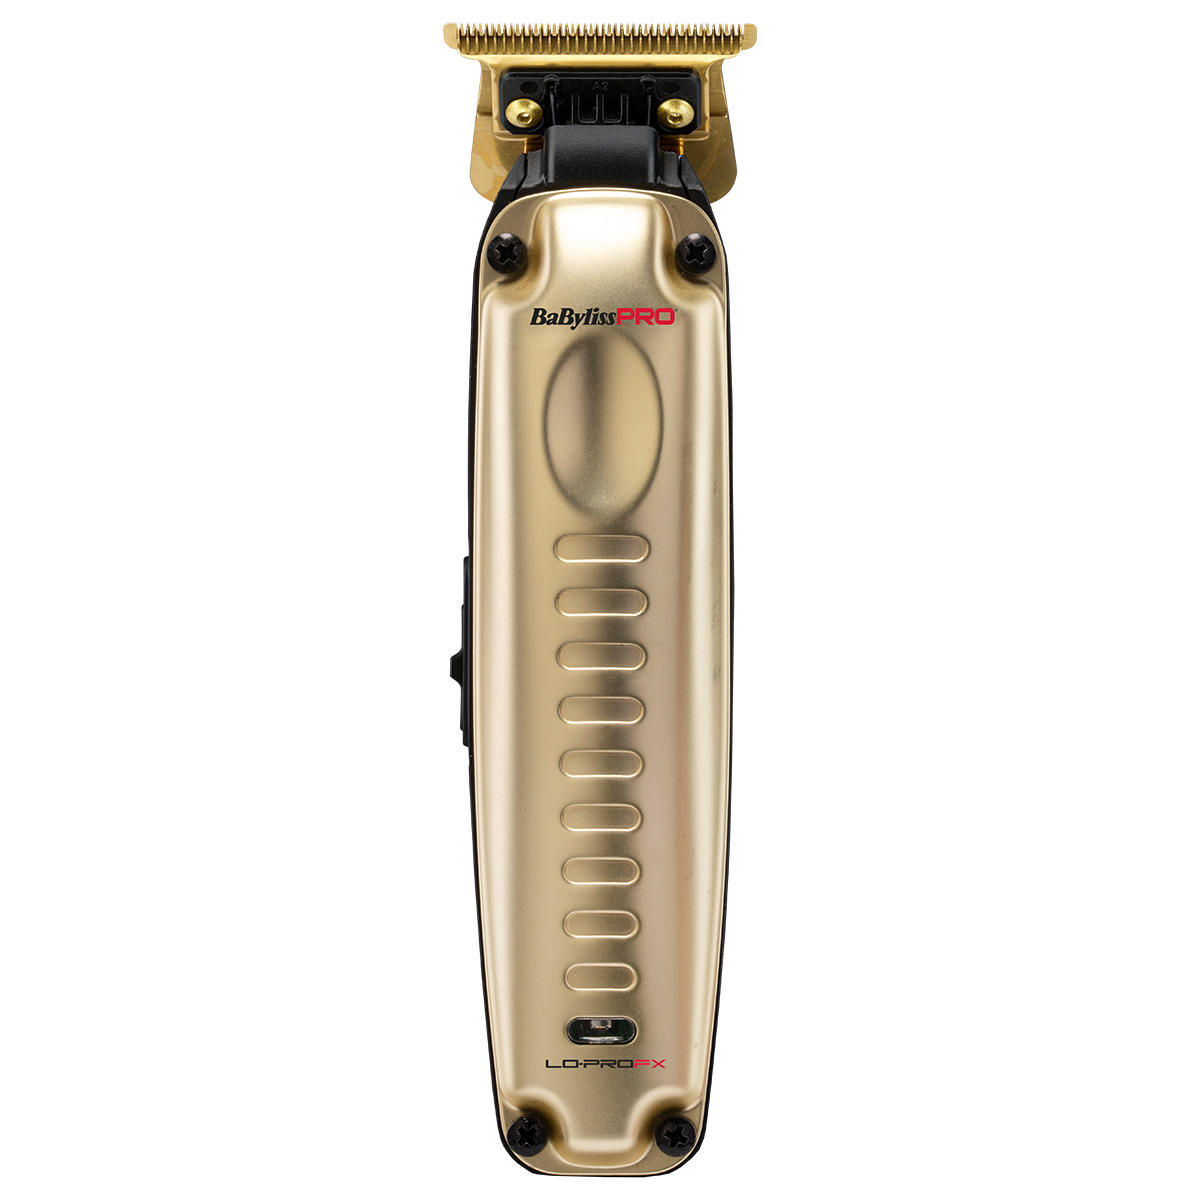 BaByliss PRO LO-PRO Trimmer FX726GE Limited Edition gold